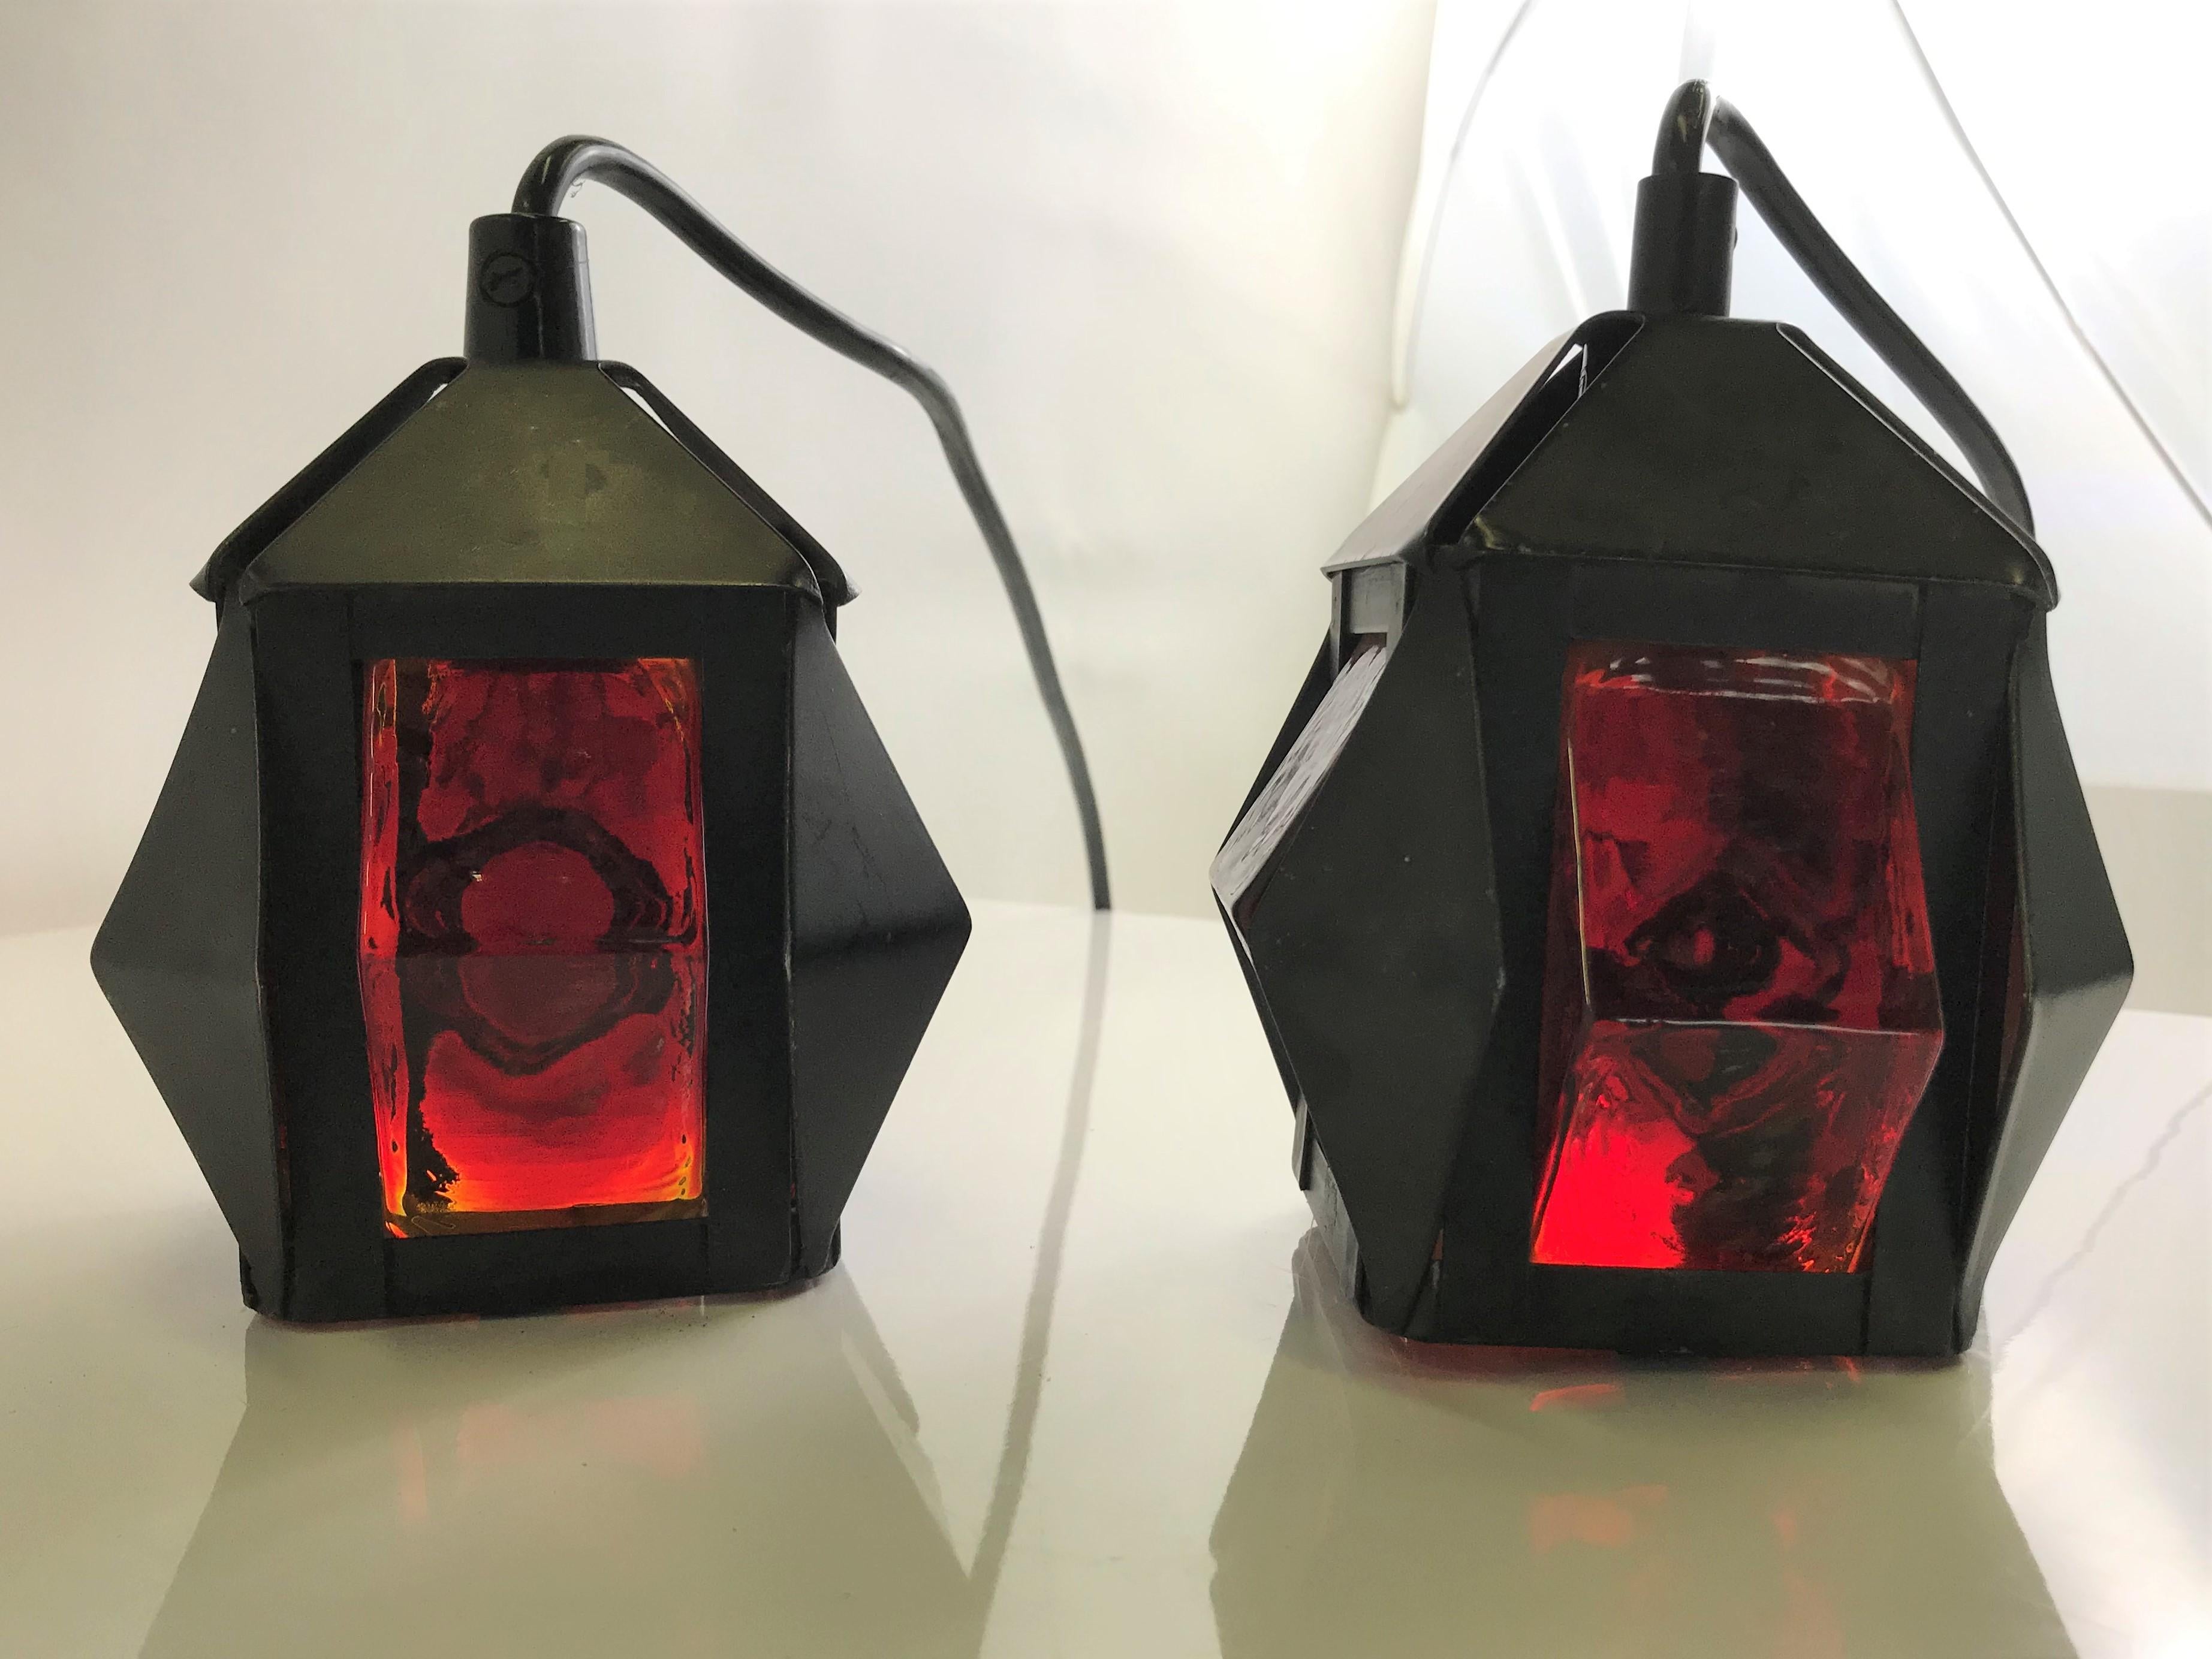 Swedish midcentury Brutalist modern pair of black metal and red molded glass panels pendants attributed to Erik Hoglund, Sweden, 1960s. The thick molded glass panels have a pyramid shape in front and the reverse is flat textured with a rhomboid in